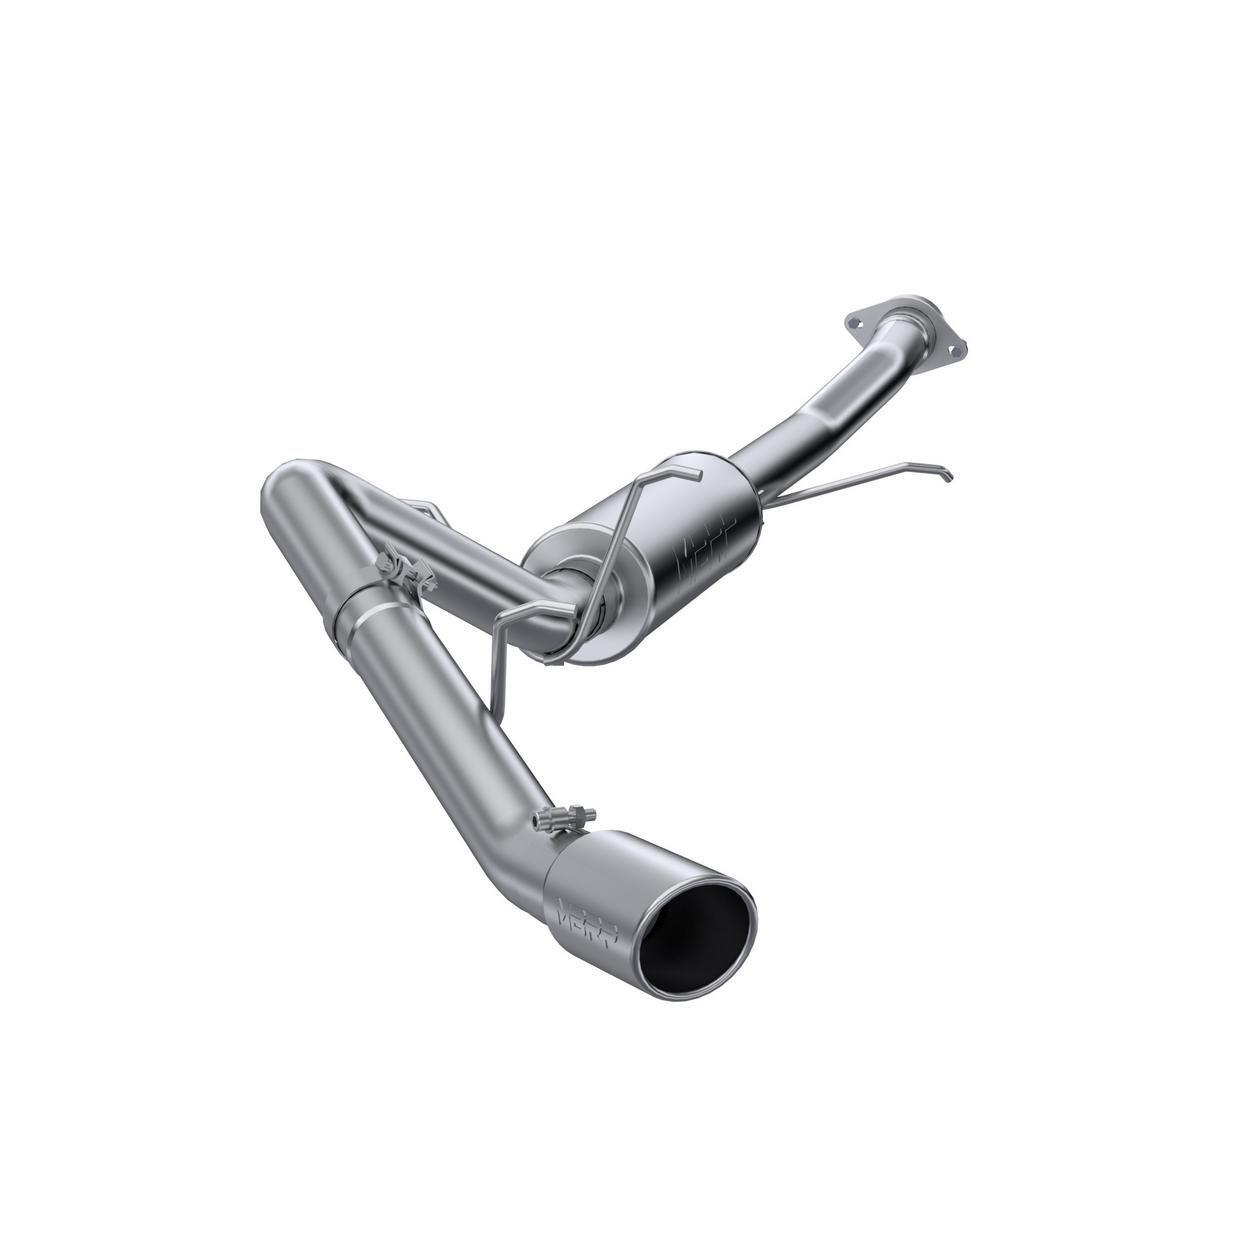 MBRP Exhaust S5034AL-AU Exhaust System Kit for 2007-2010 Cadillac Escalade ESV